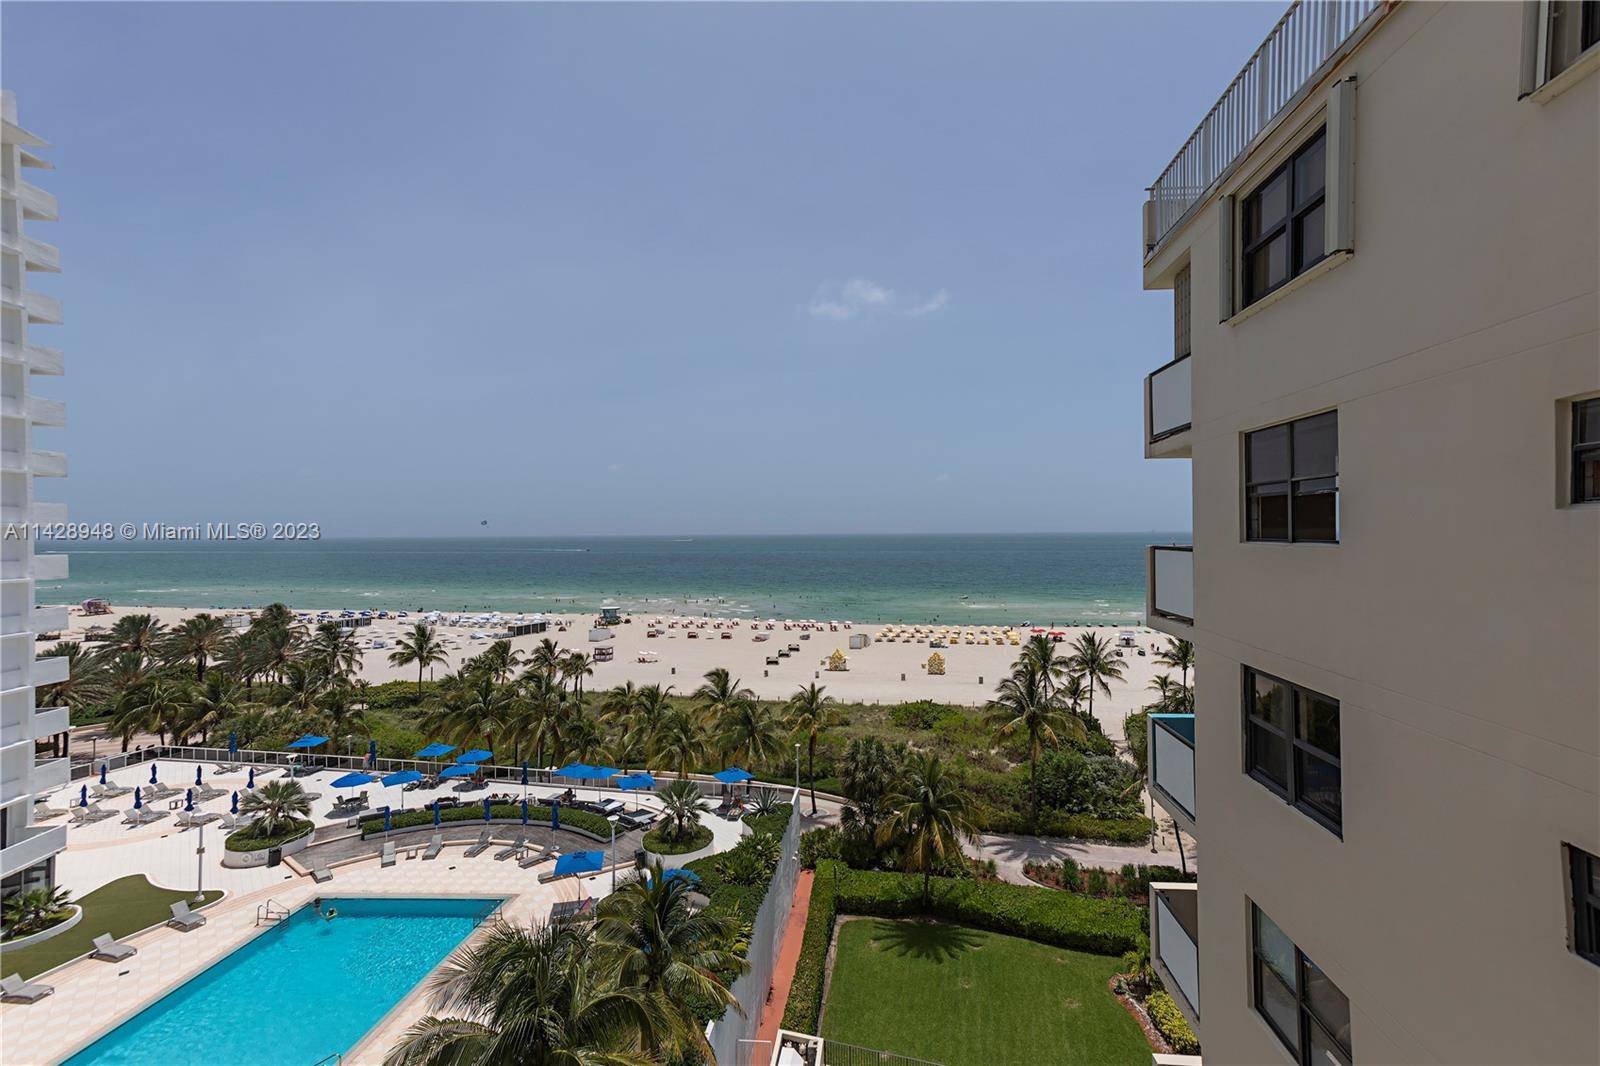 Breathtaking views from this direct oceanfront 2 bed 2 bath and a den at The Georgian Condominium in world famous Miami Beach.